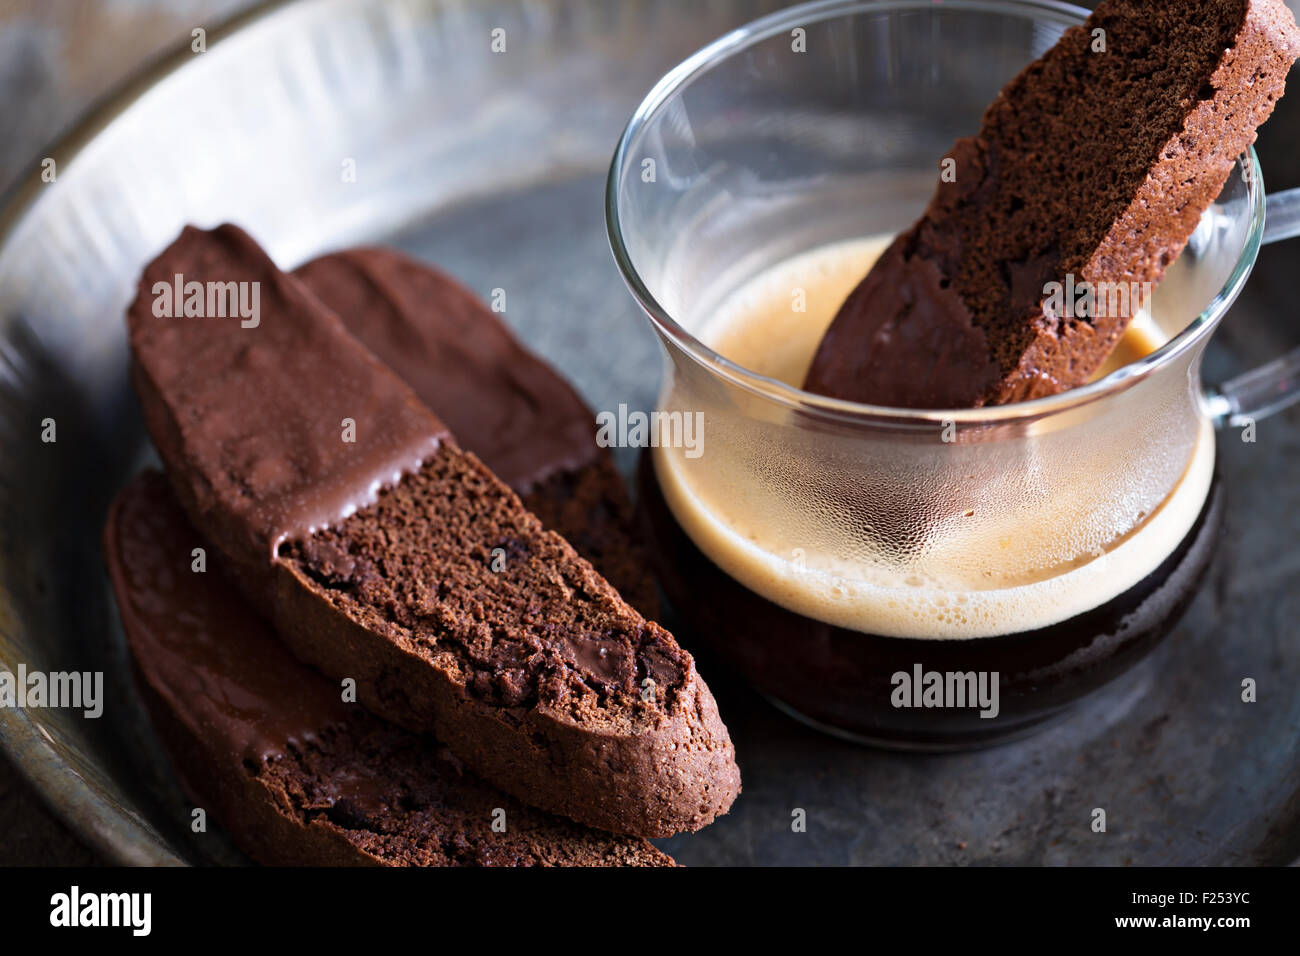 Chocolate biscotti cookies dipped in chocolate with a cup of coffee Stock Photo